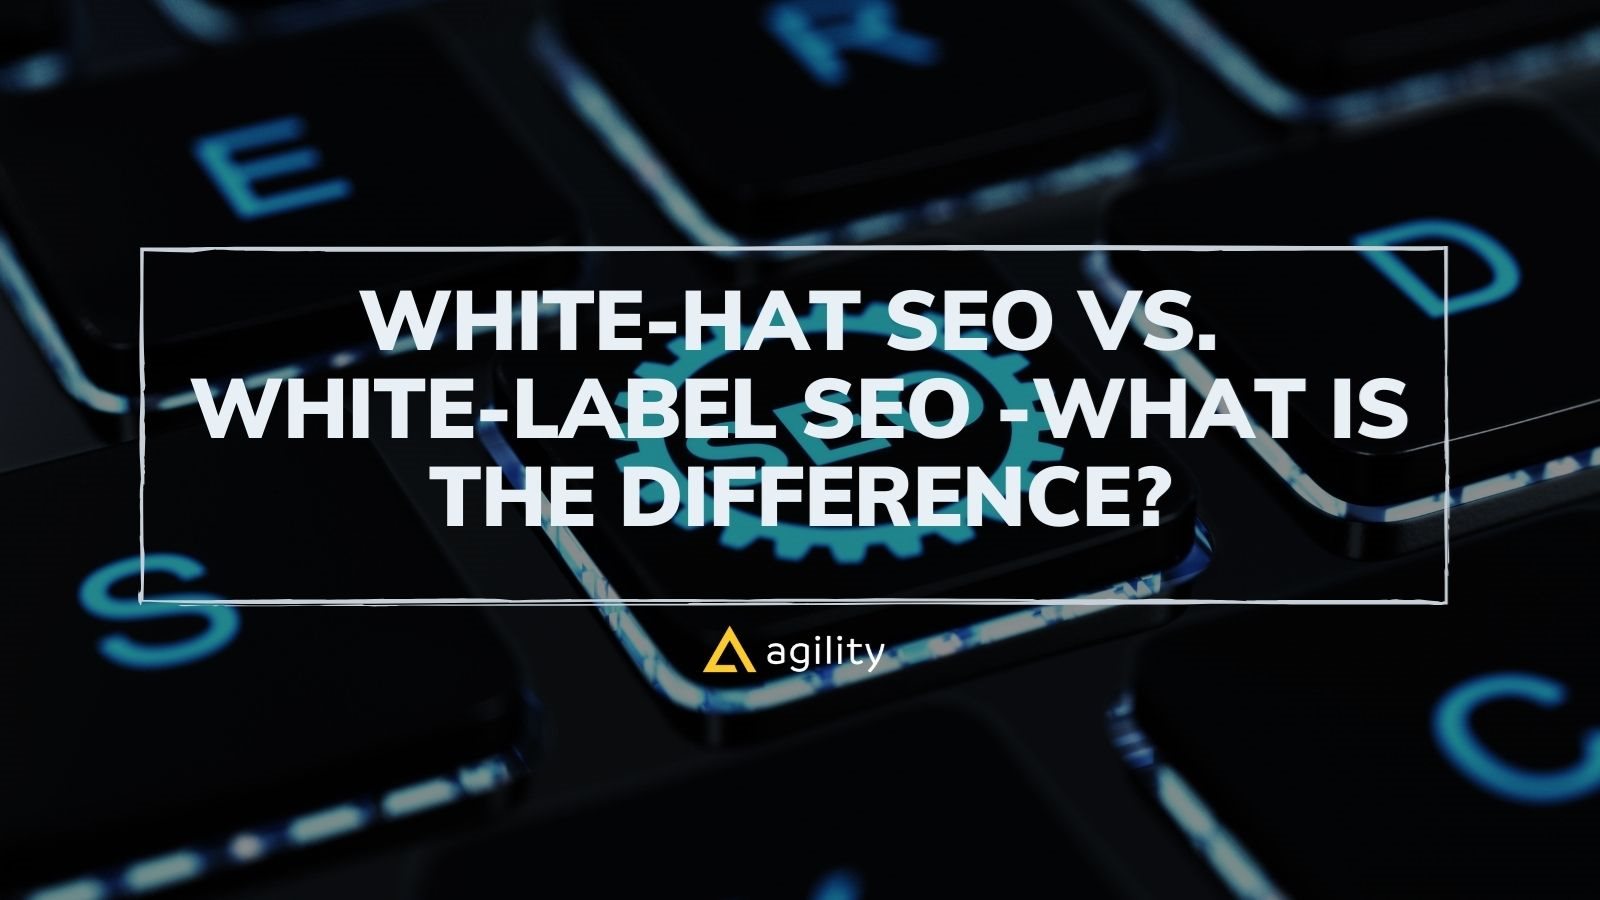 White-hat SEO vs. White-label SEO -What Is the Difference?